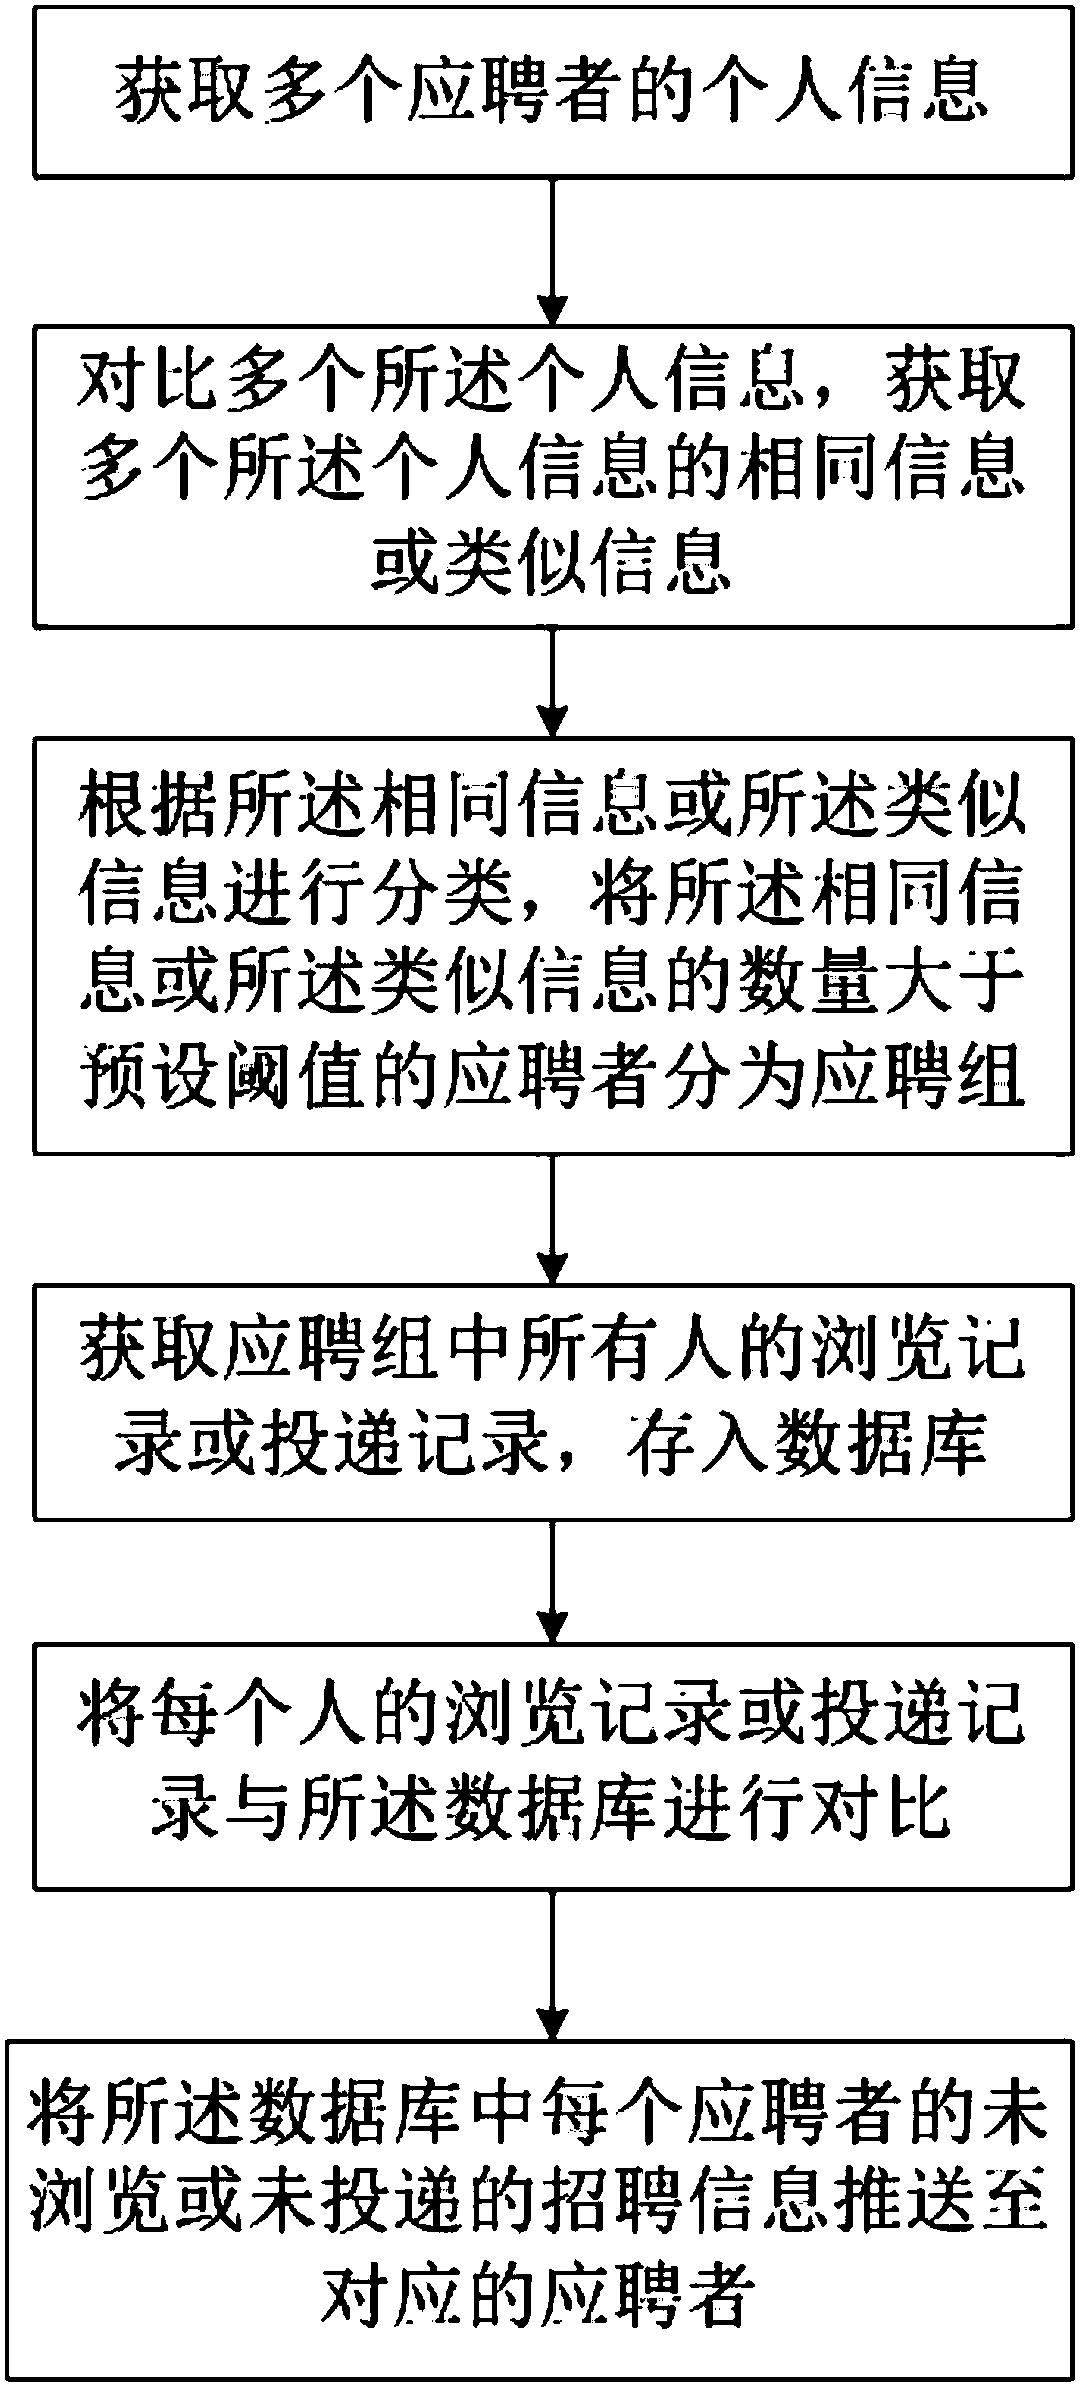 Recommendation method and system for recruitment system